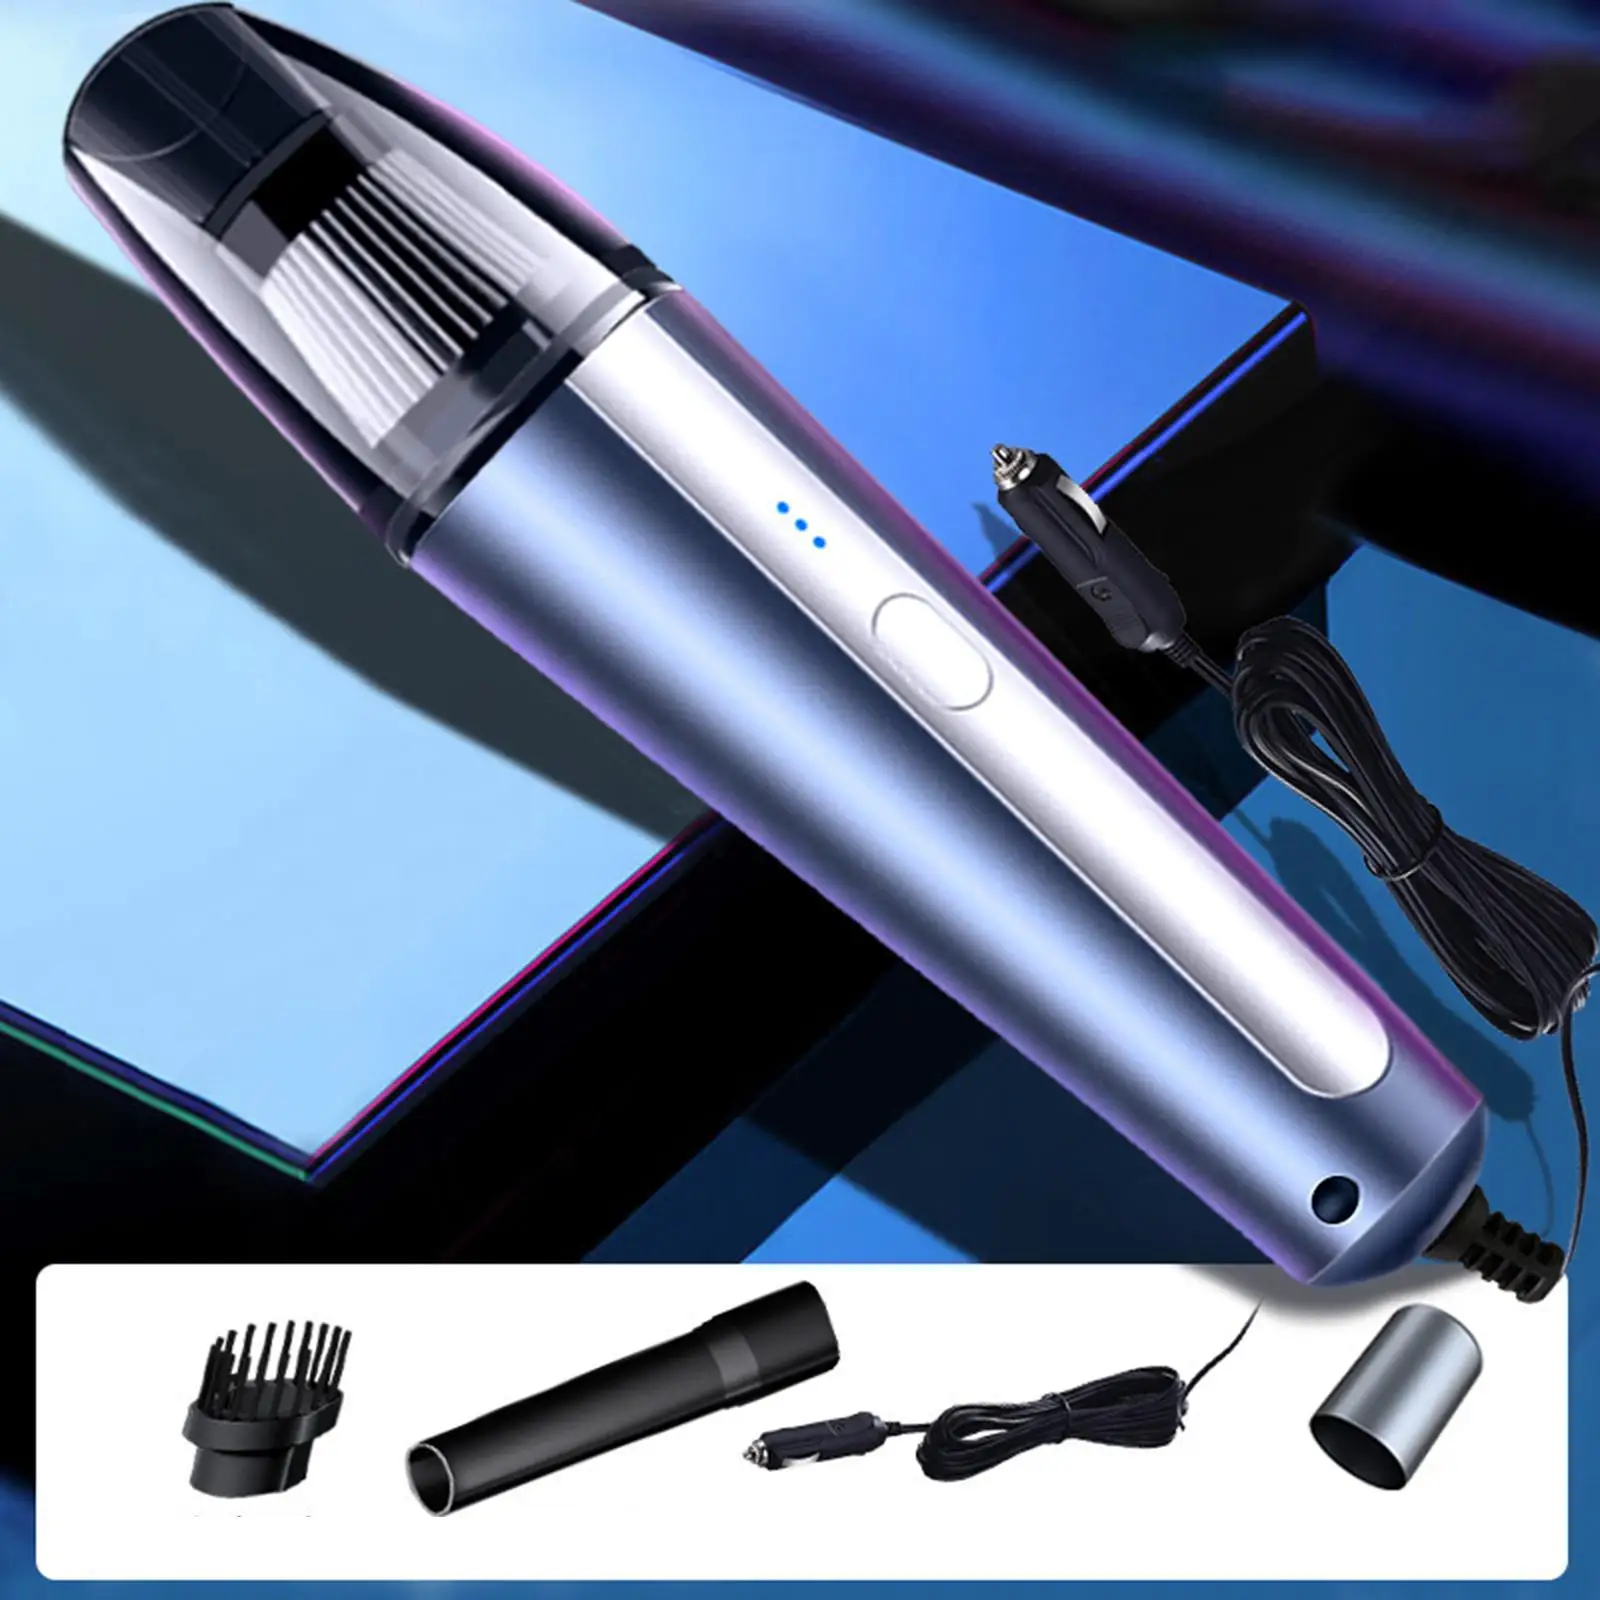 Handheld Cars Vacuum Cleaner Dry and Wet Use 6000PA Strong Suction 4000mAh Cyclone Suction Fit for Home Office Seats Supplies